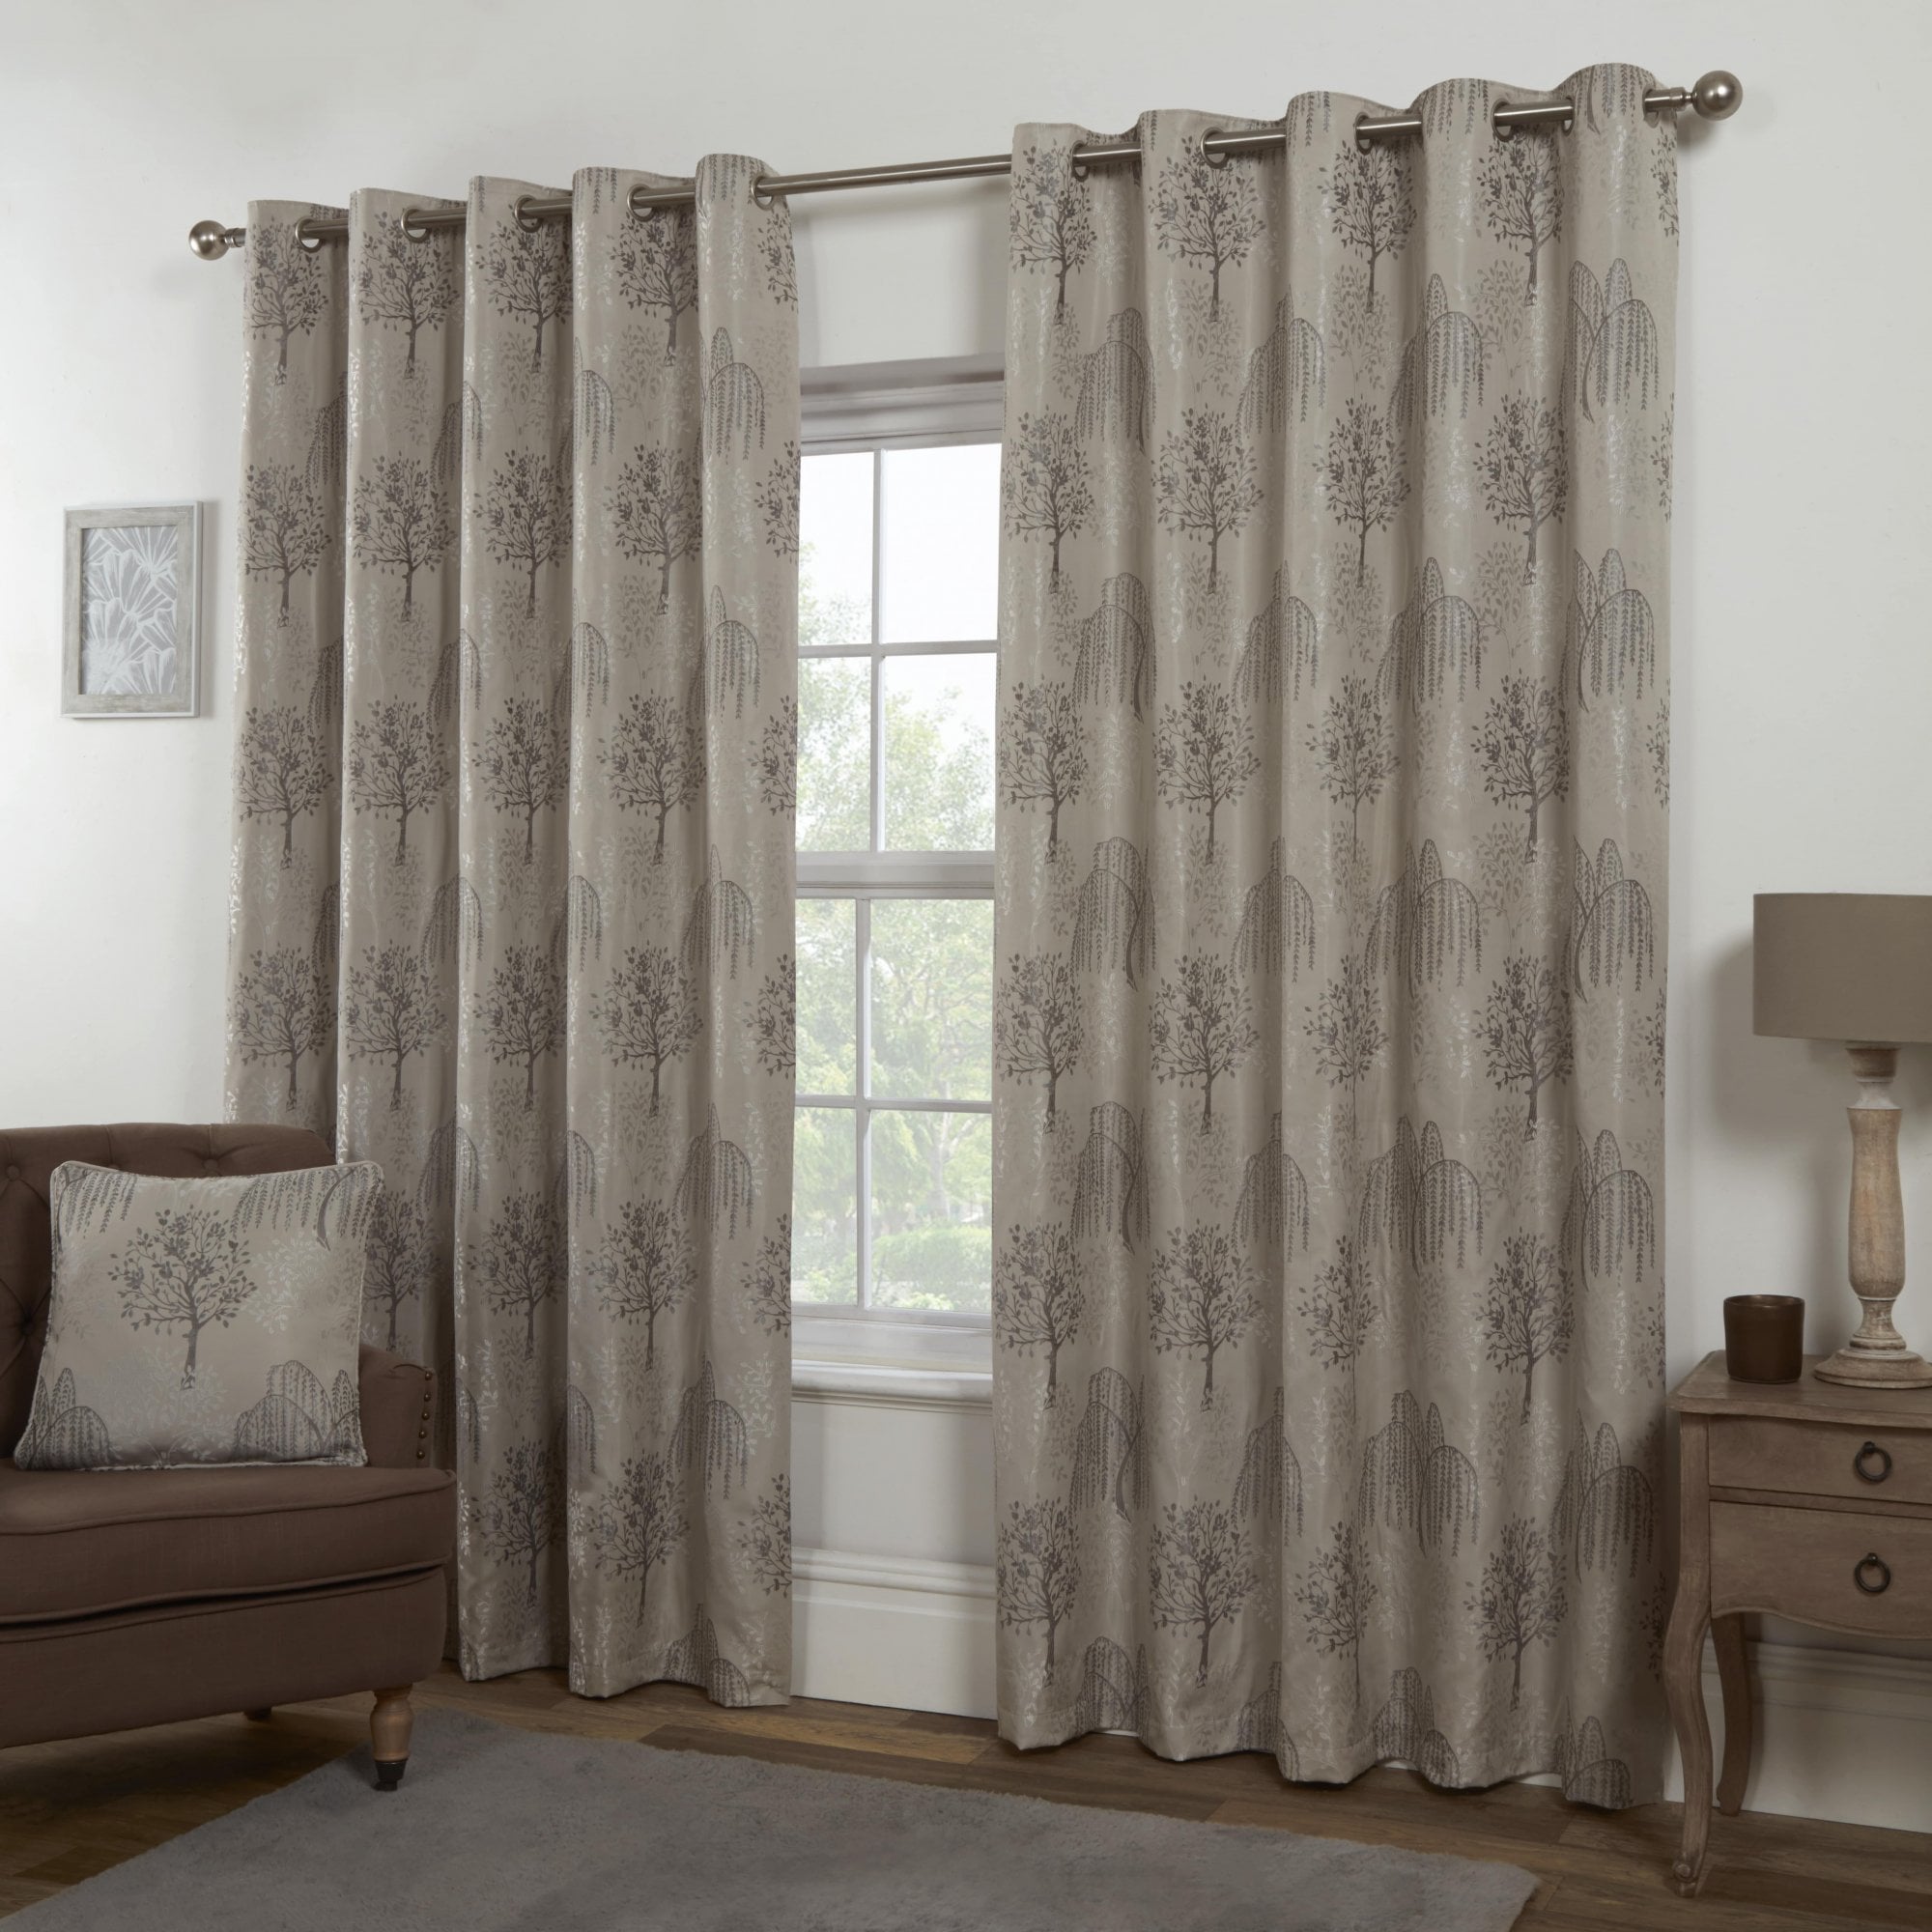 Lewis’s Orchard Patterned Eyelet Curtains - Silver - 117cm (46") X 137cm (54")  | TJ Hughes